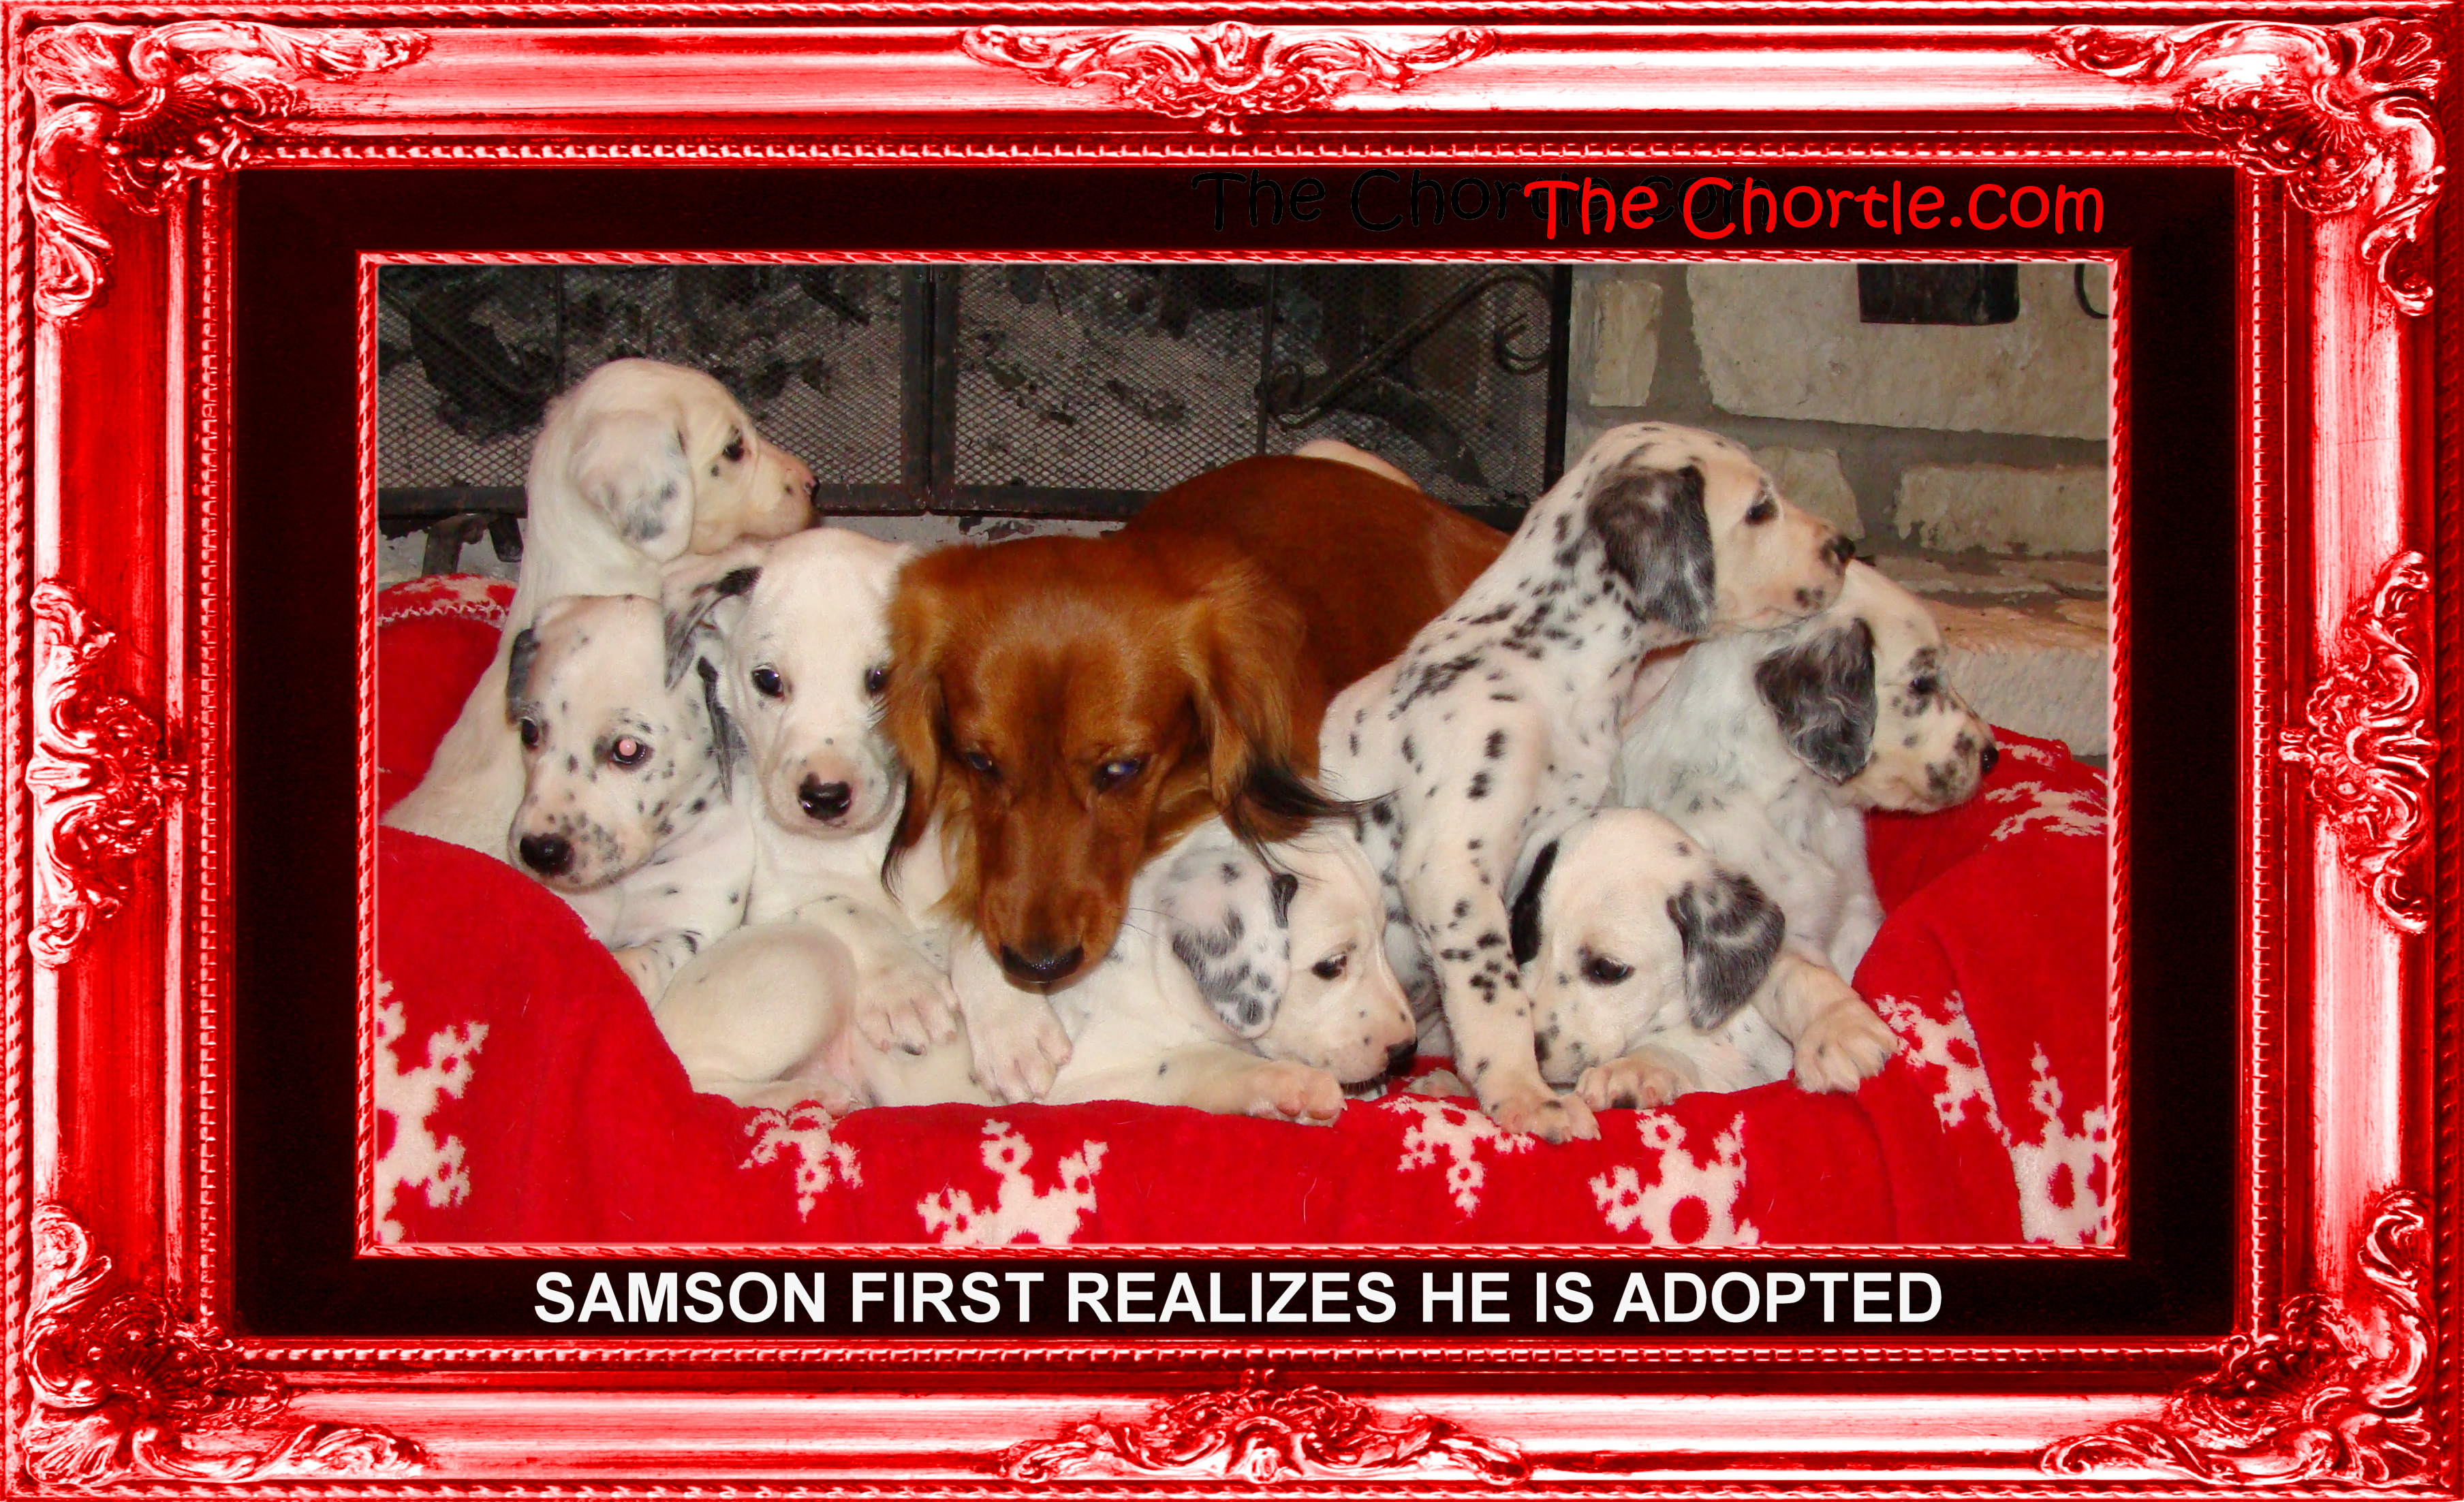 Samson first realizes he is adopted.